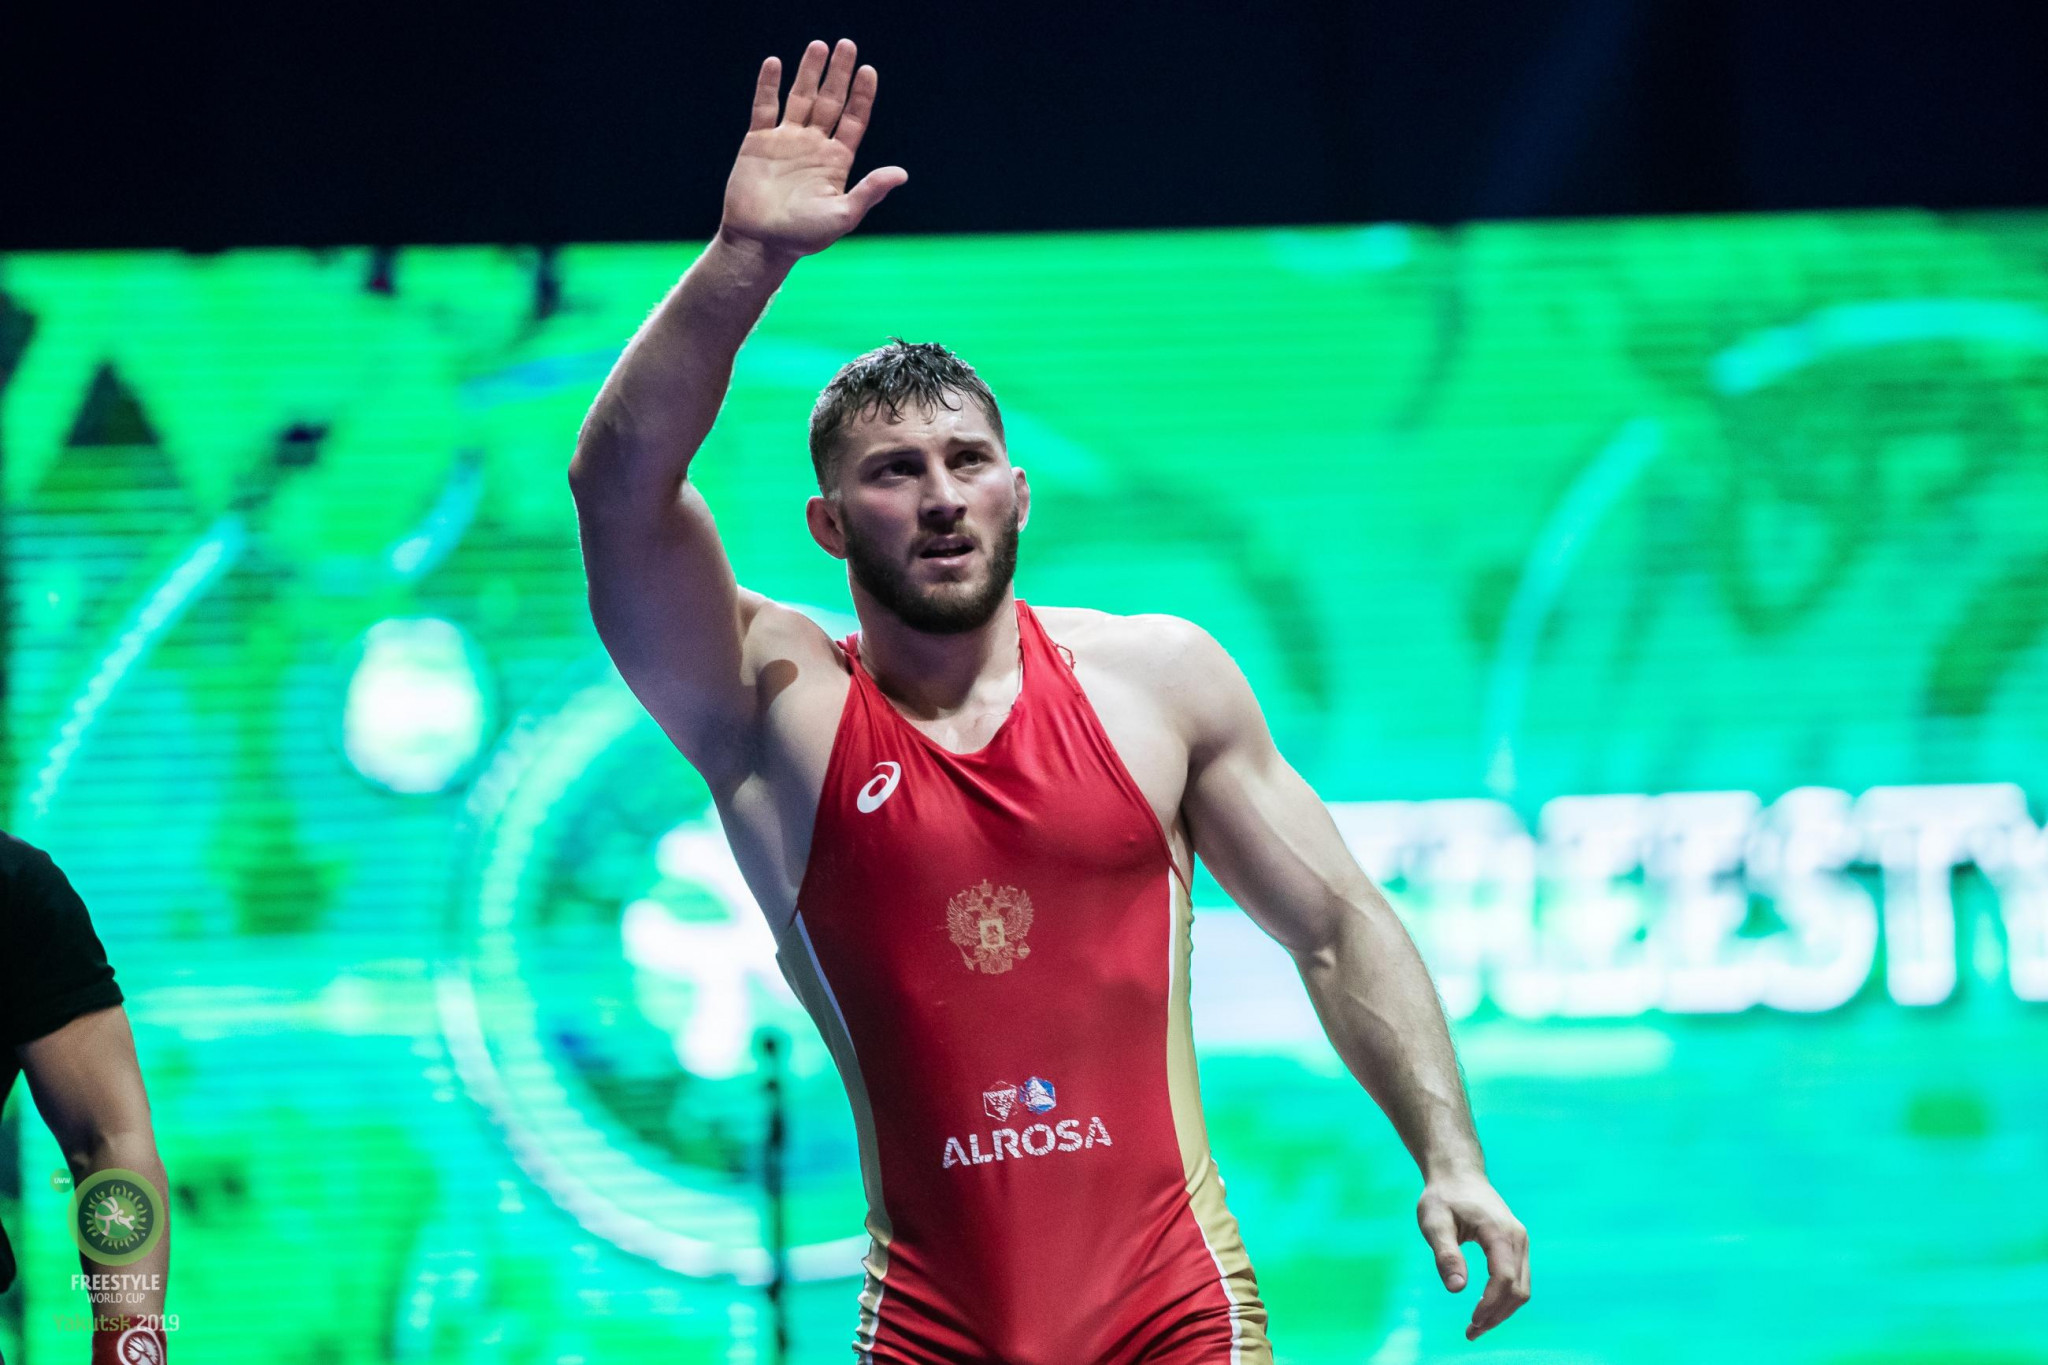 Russia takes first UWW Freestyle World Cup title since 2011 in front of home crowd